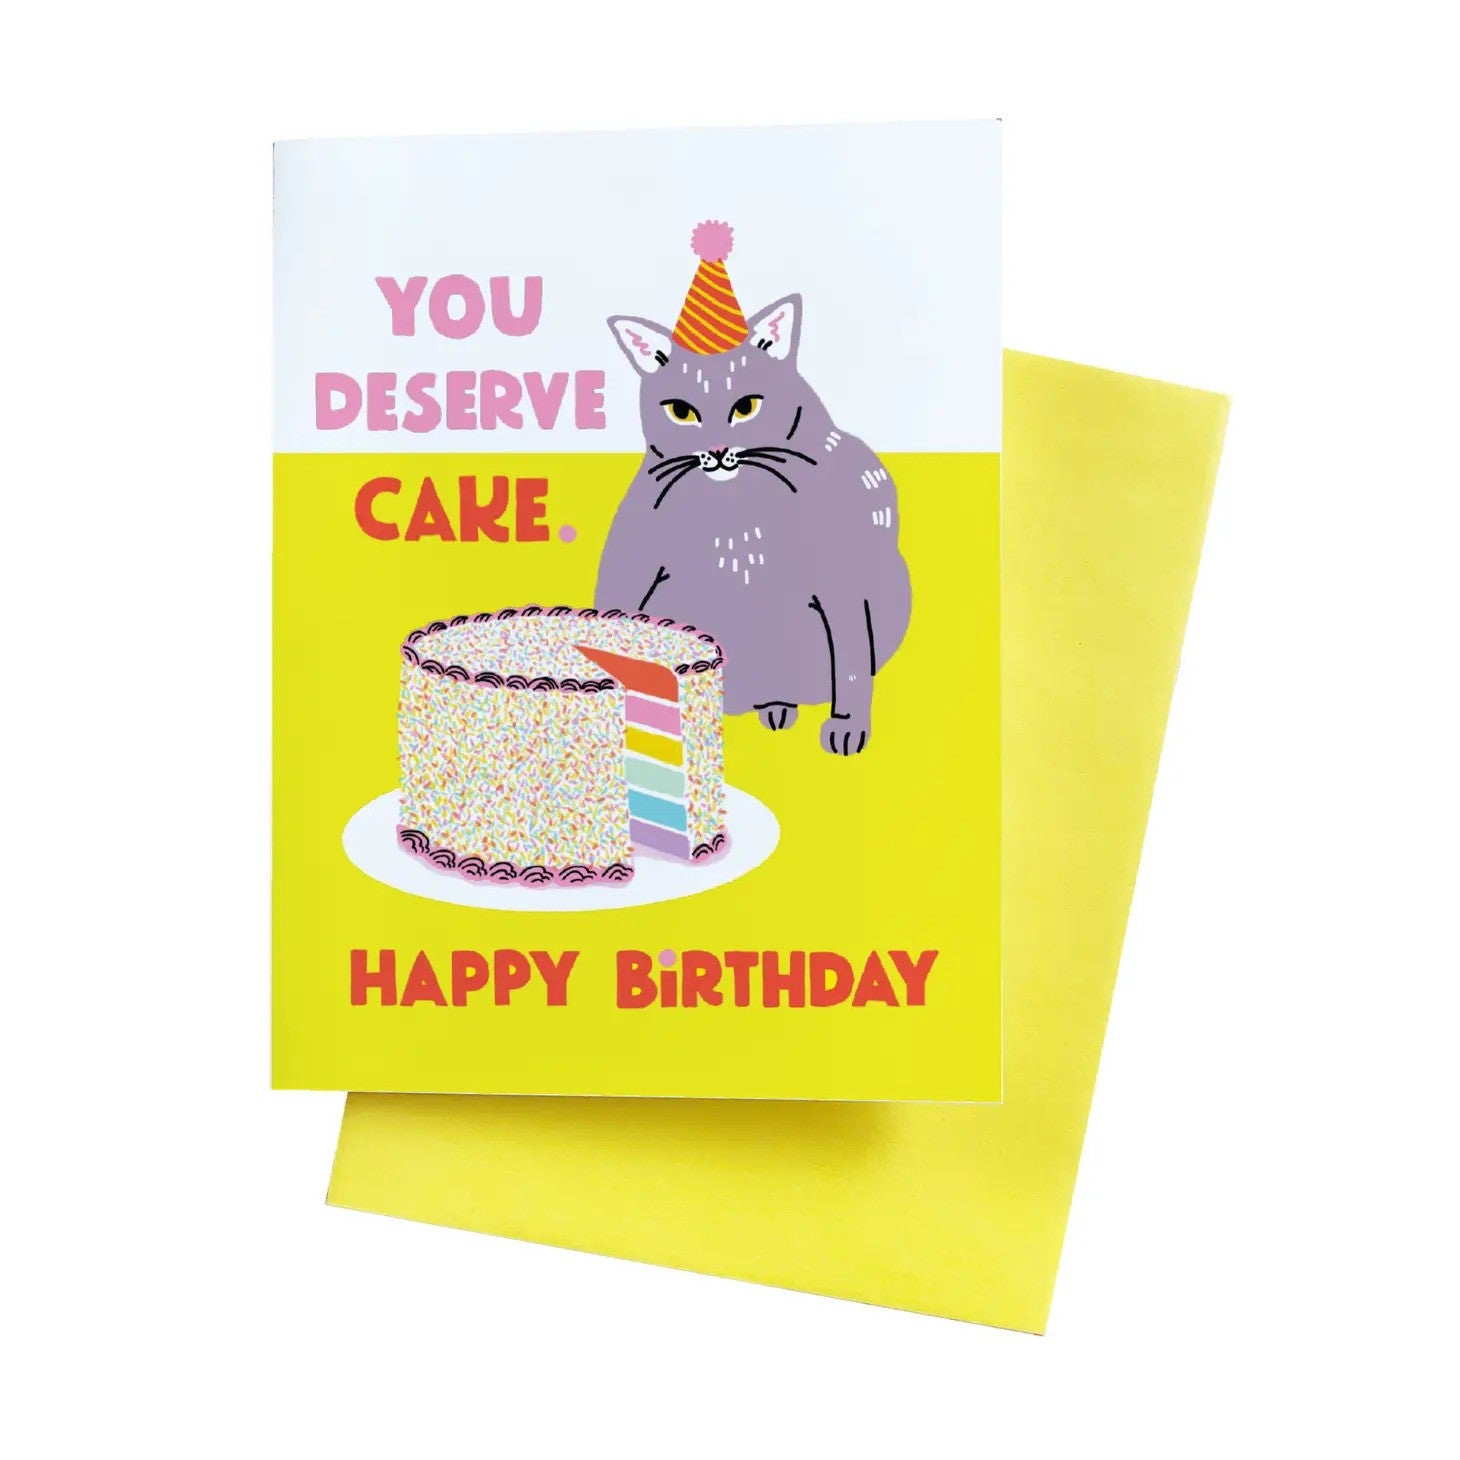 You Deserve Cake Fat Cat Birthday Card